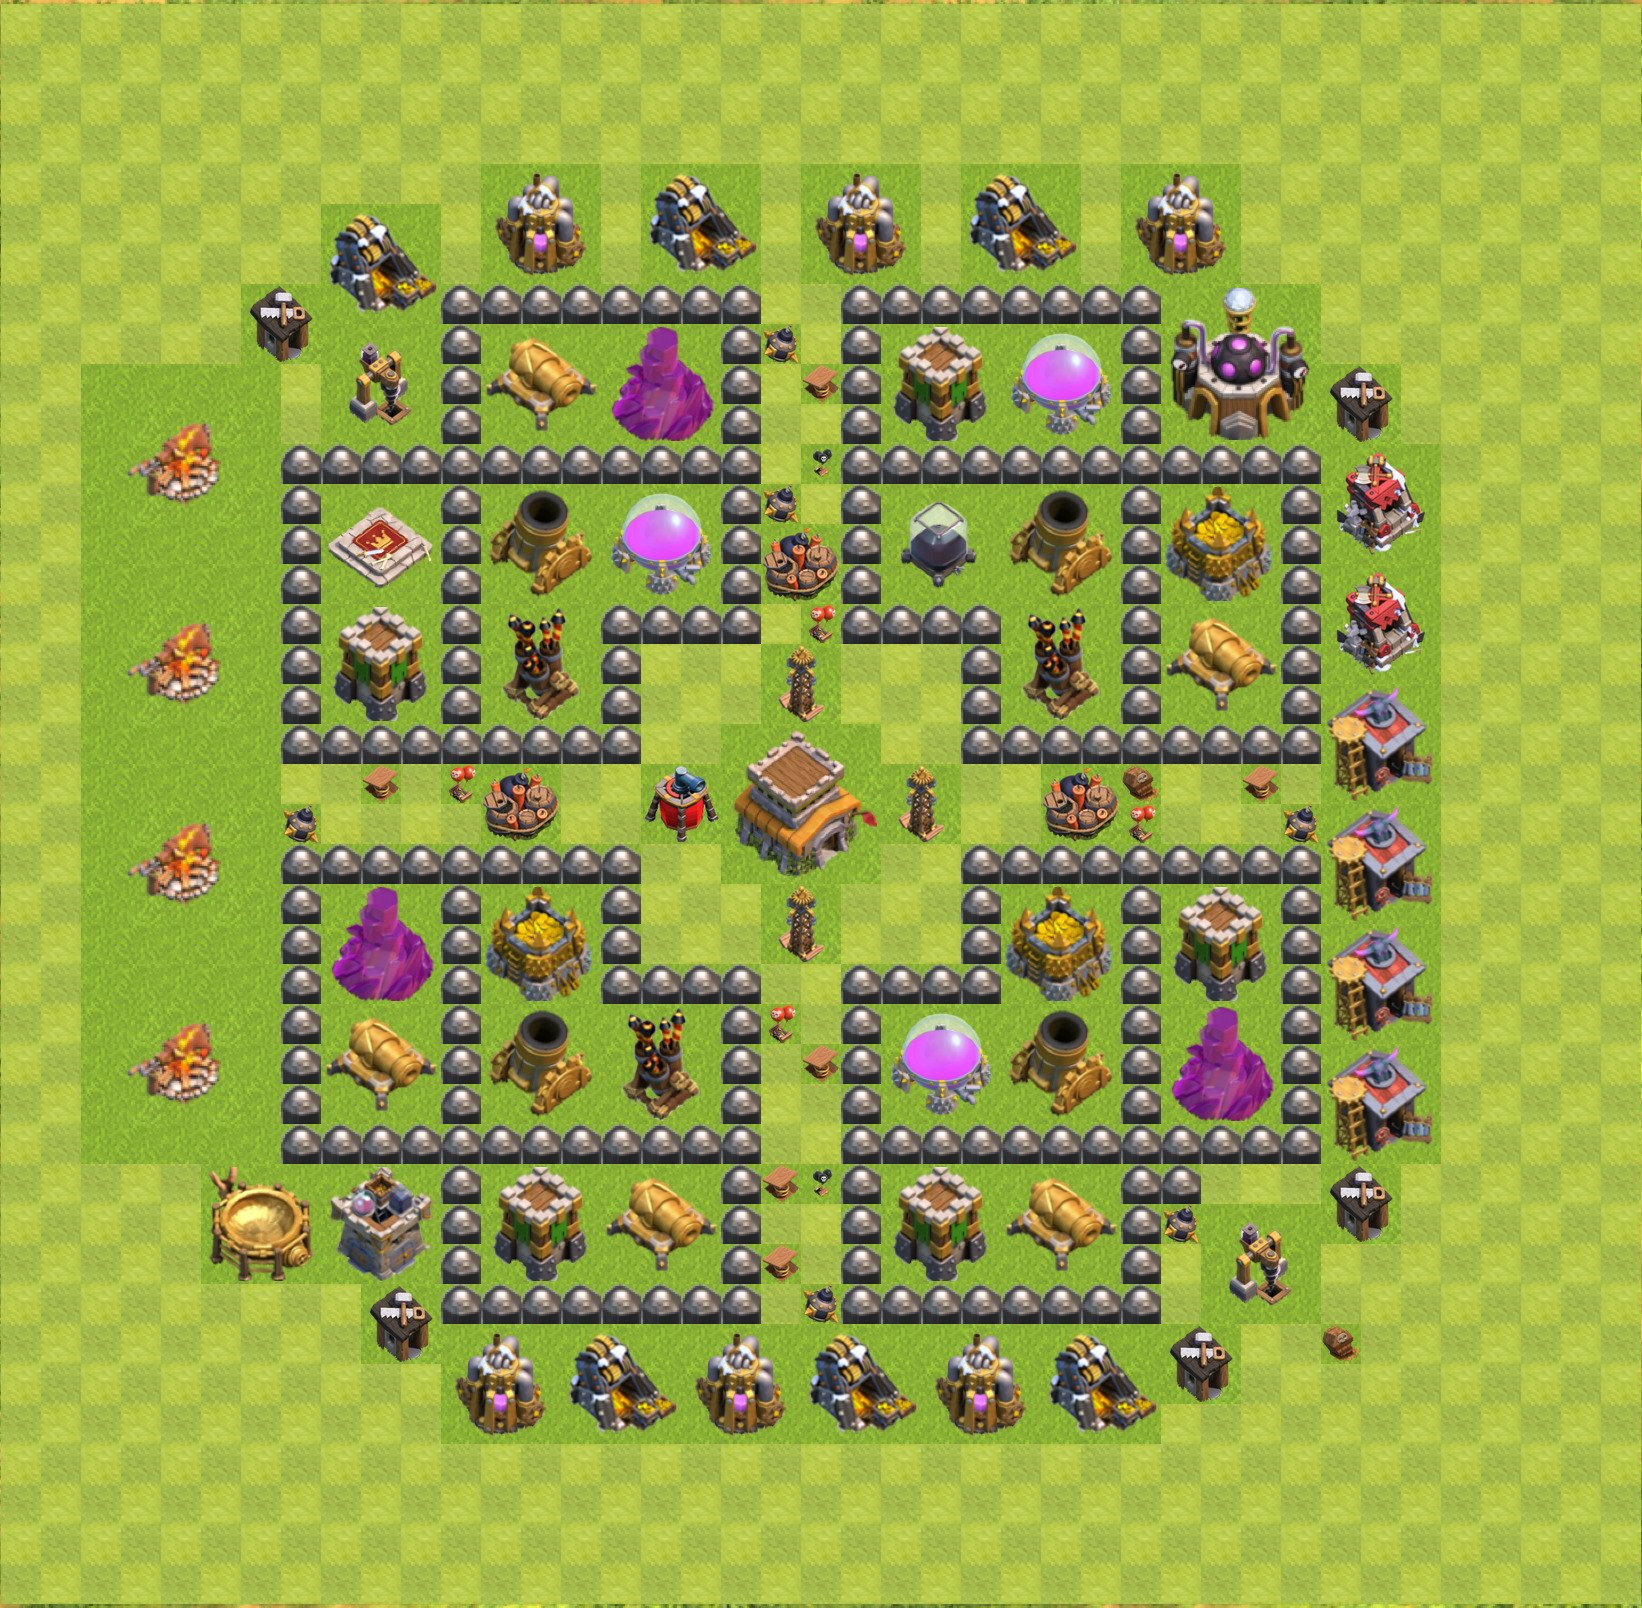 Lvl 8 layout  Clash of clans, Clash of clans game, Clash of clans hack